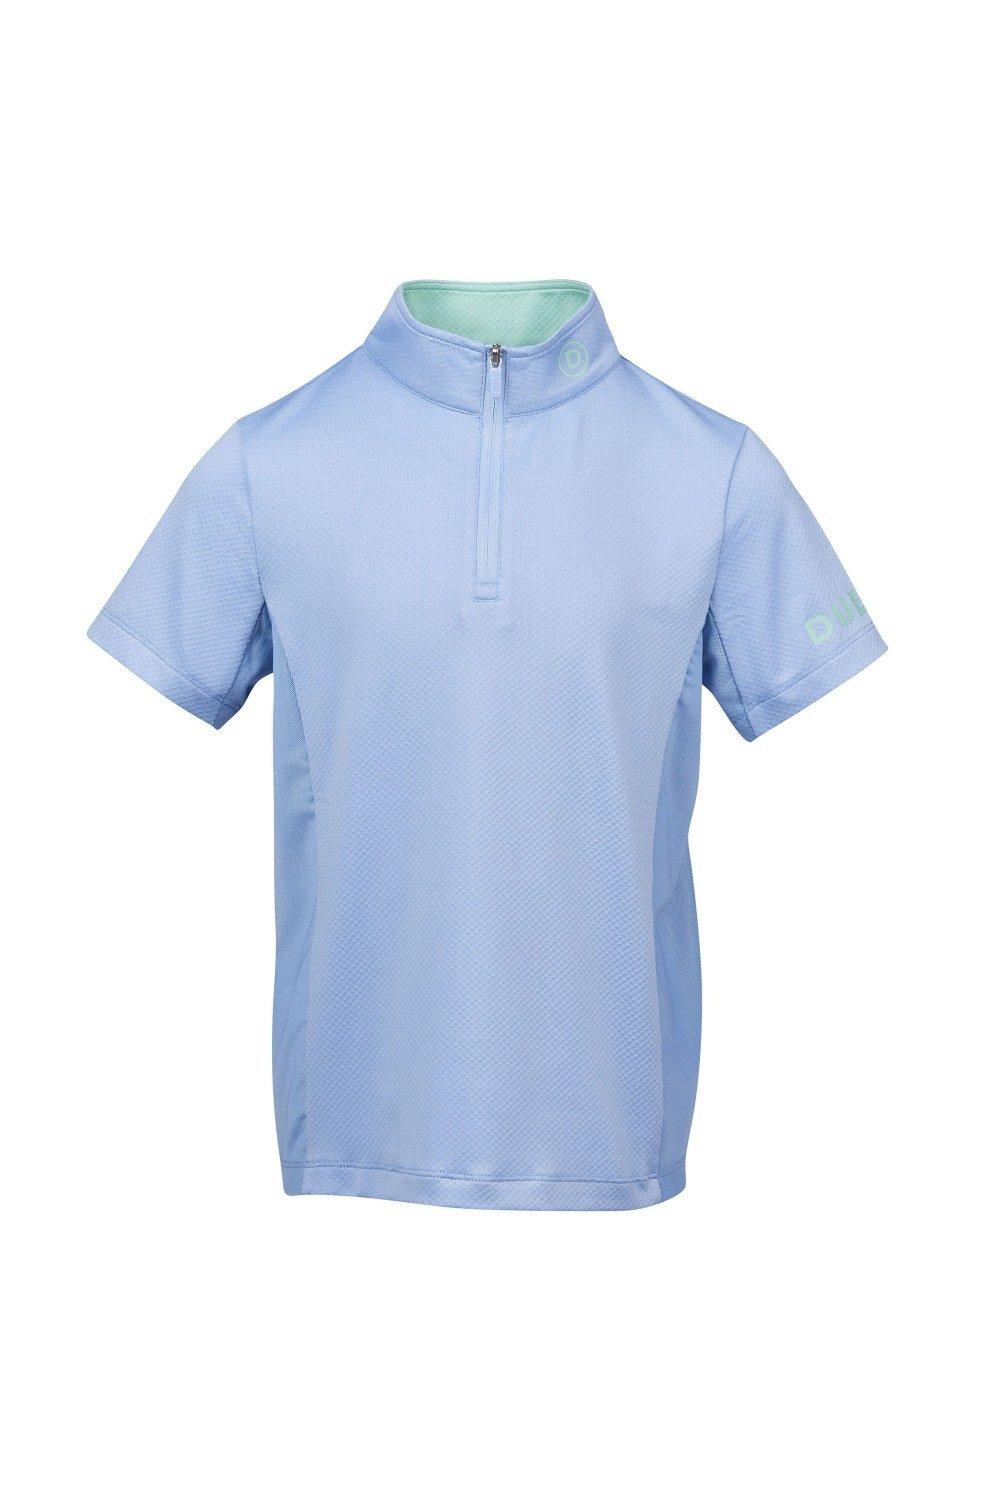 Airflow CDT Short-Sleeved Horse Riding Top